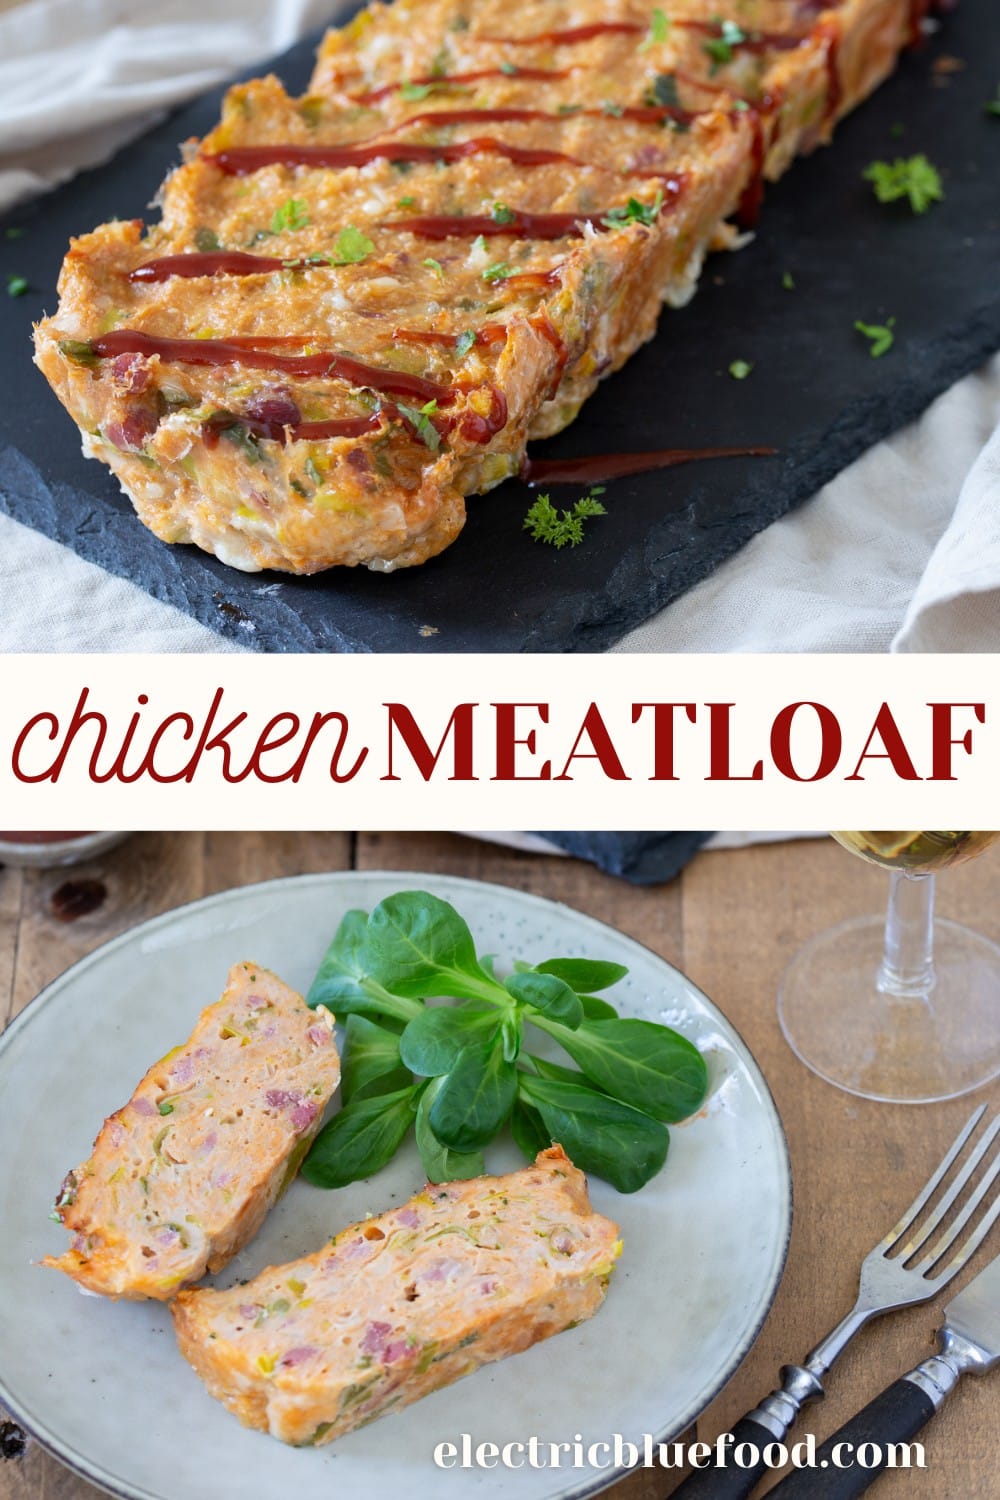 Chicken meatloaf with bacon and leeks.